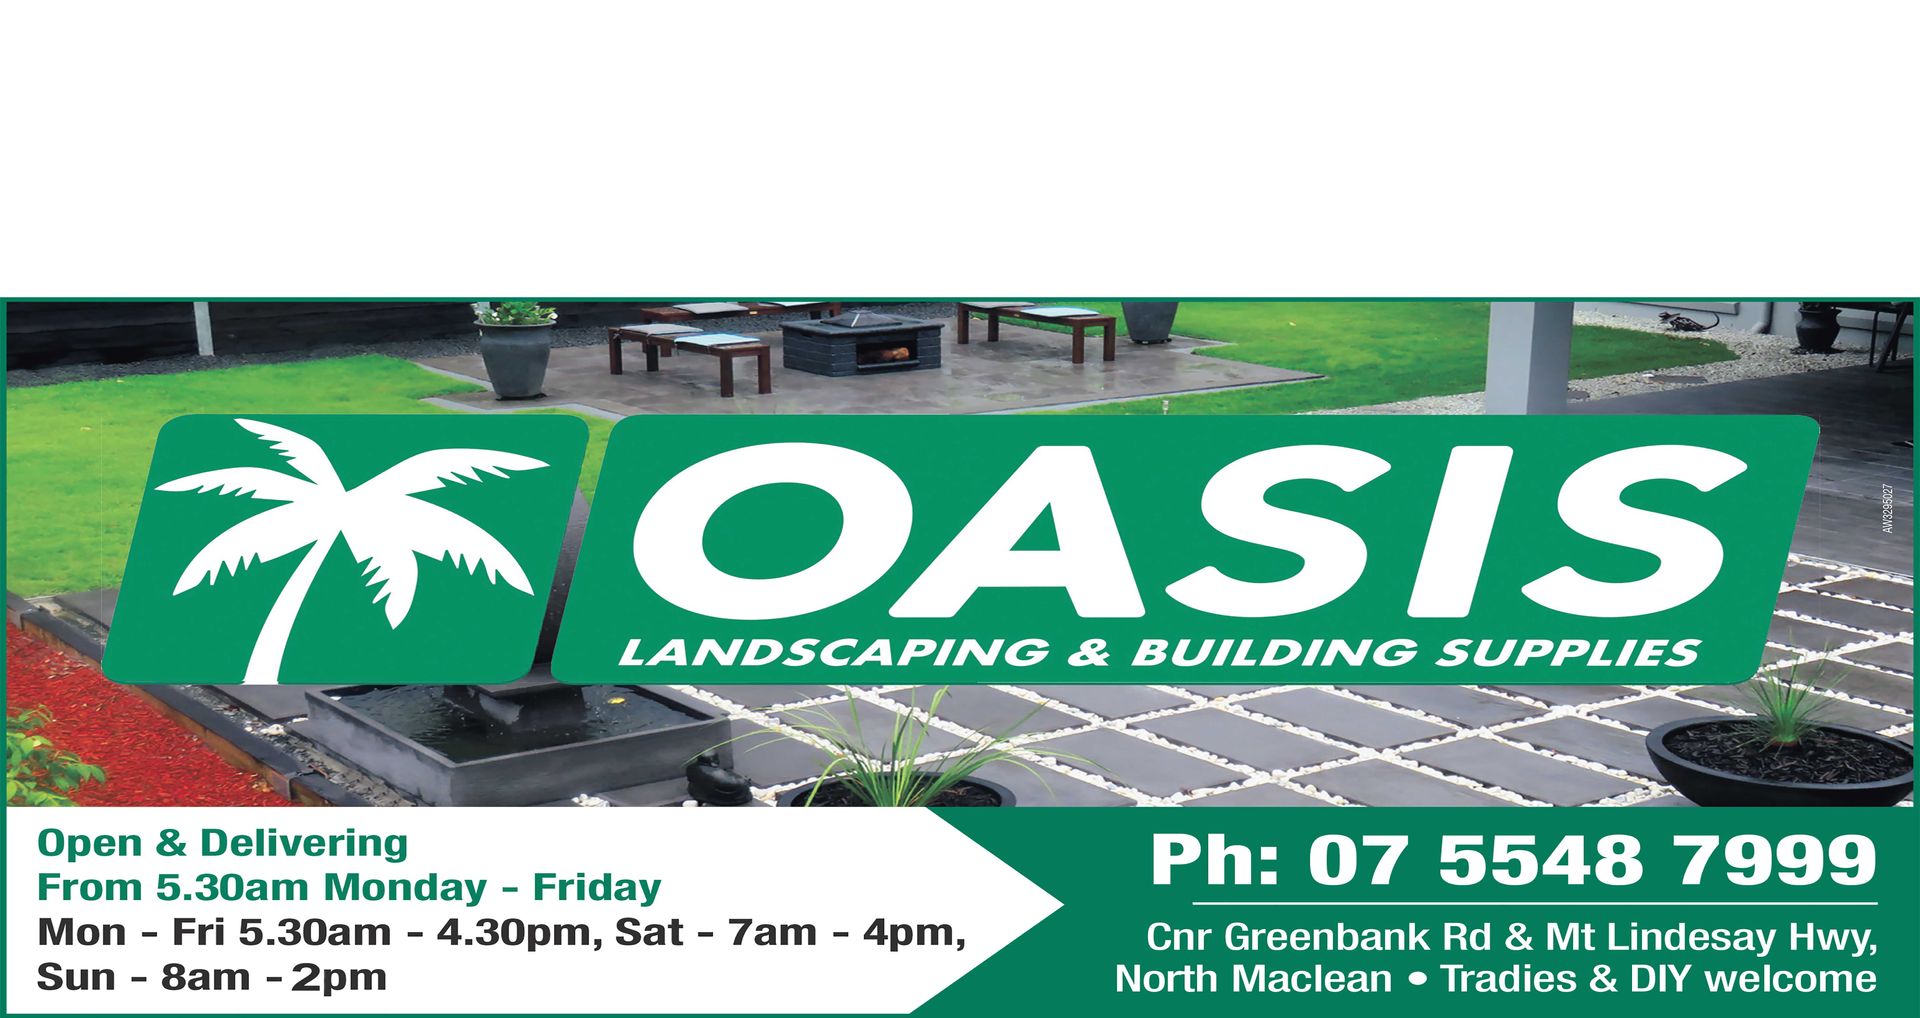 ONE OF BRISBANE’S TOP SUPPLIERS OF LANDSCAPING & BUILDING SUPPLIES